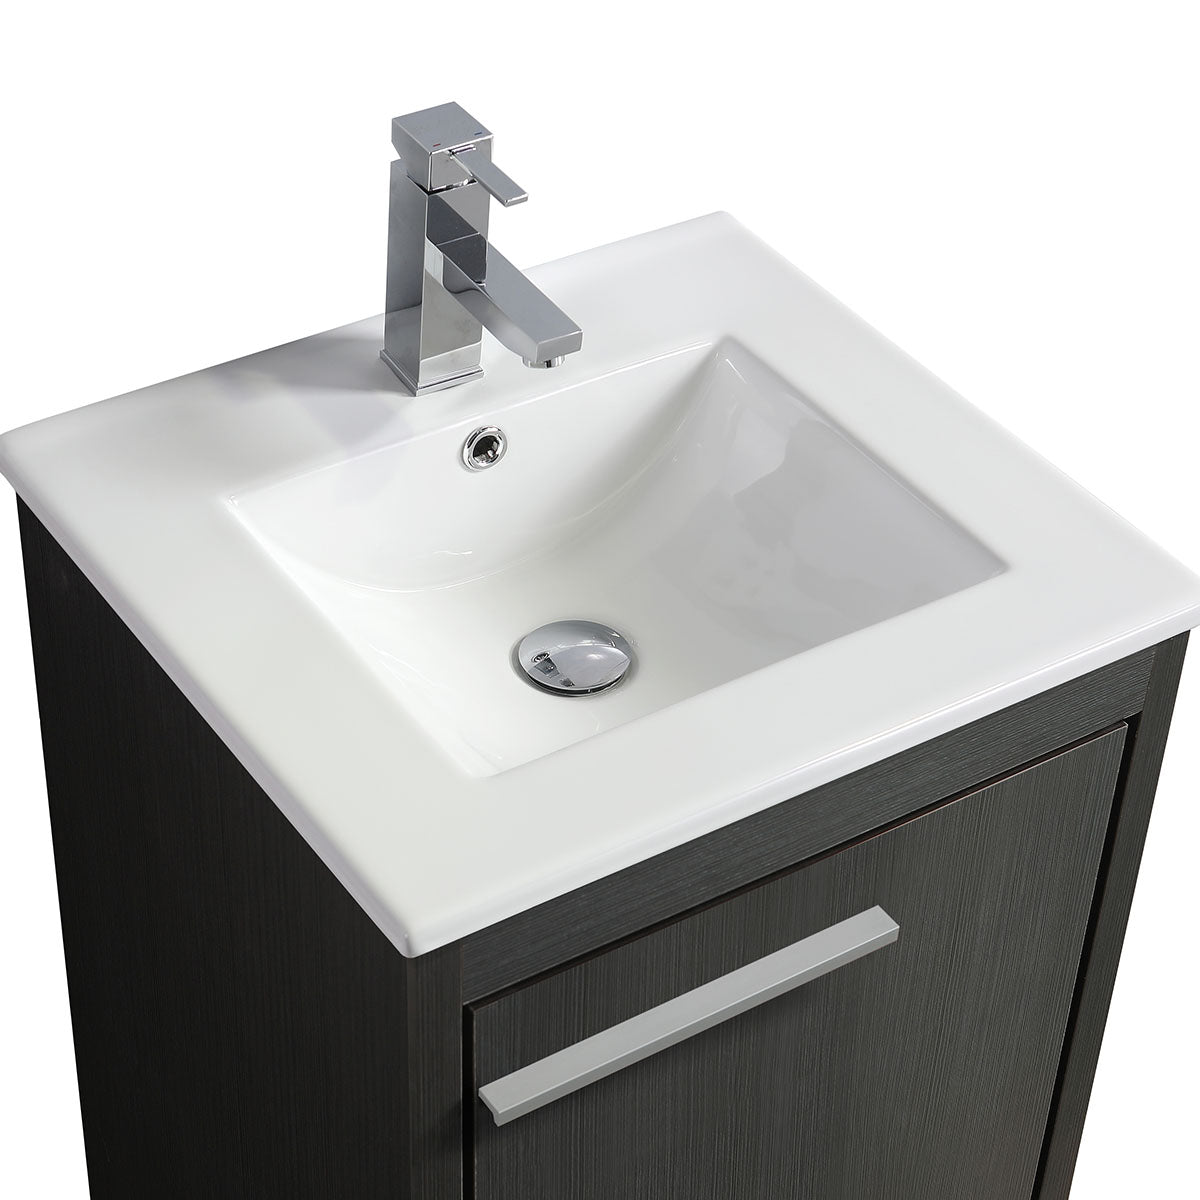 20" Vanity with Ceramic Sink (Charcoal Grey) V9004 Series - iStyle Bath